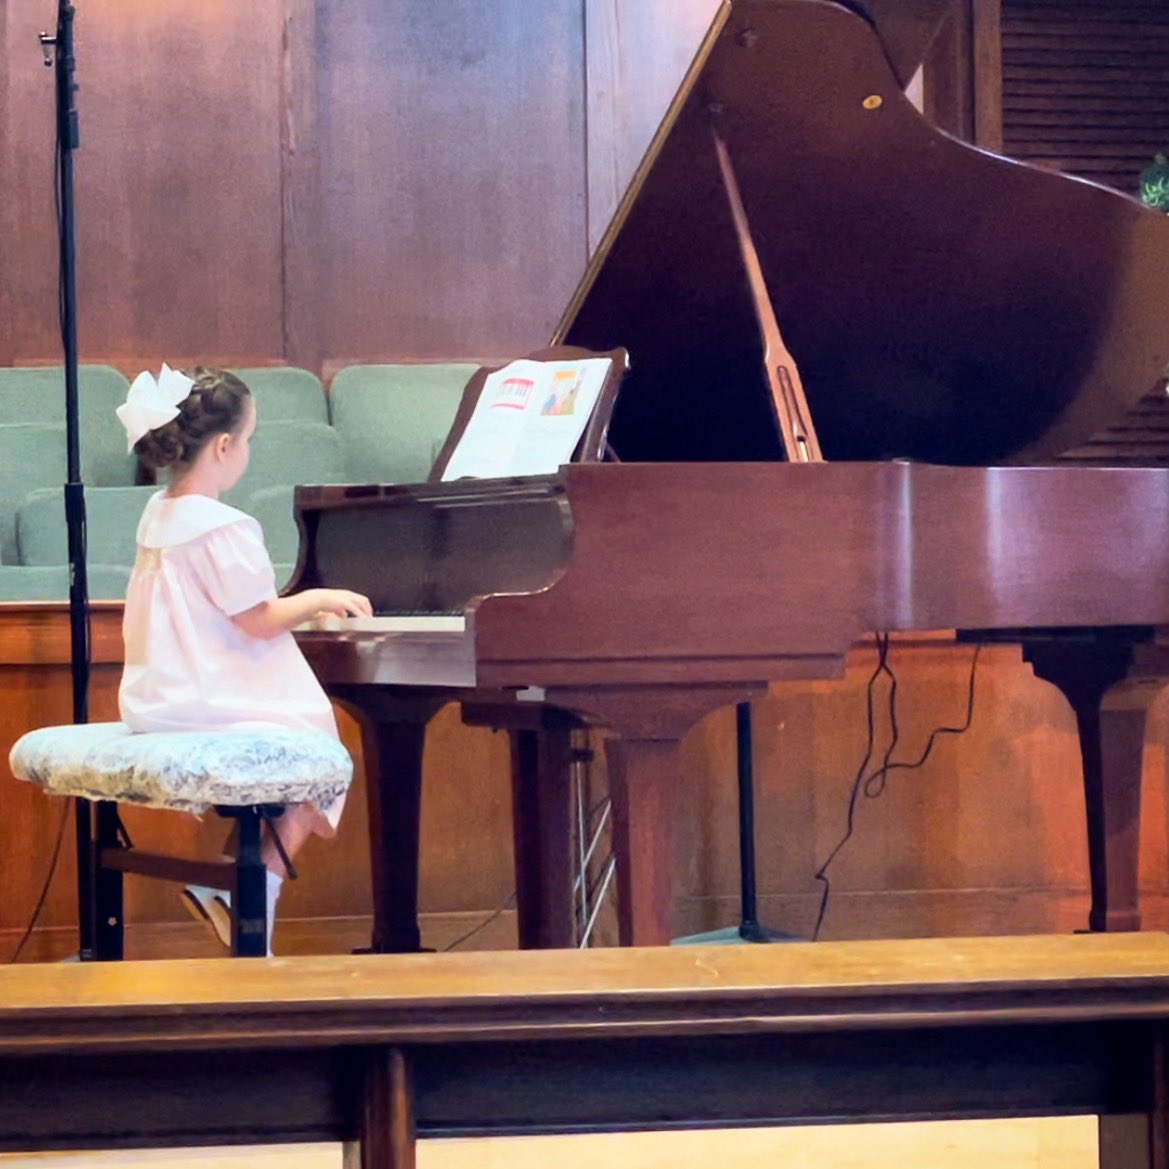 Brilliant and bold… Lyra Jane nailed it! 
:::
LOVE my one and only granddaughter!

🎹😍

#OdeToJoy
#Beethoven 
#PianoRecital